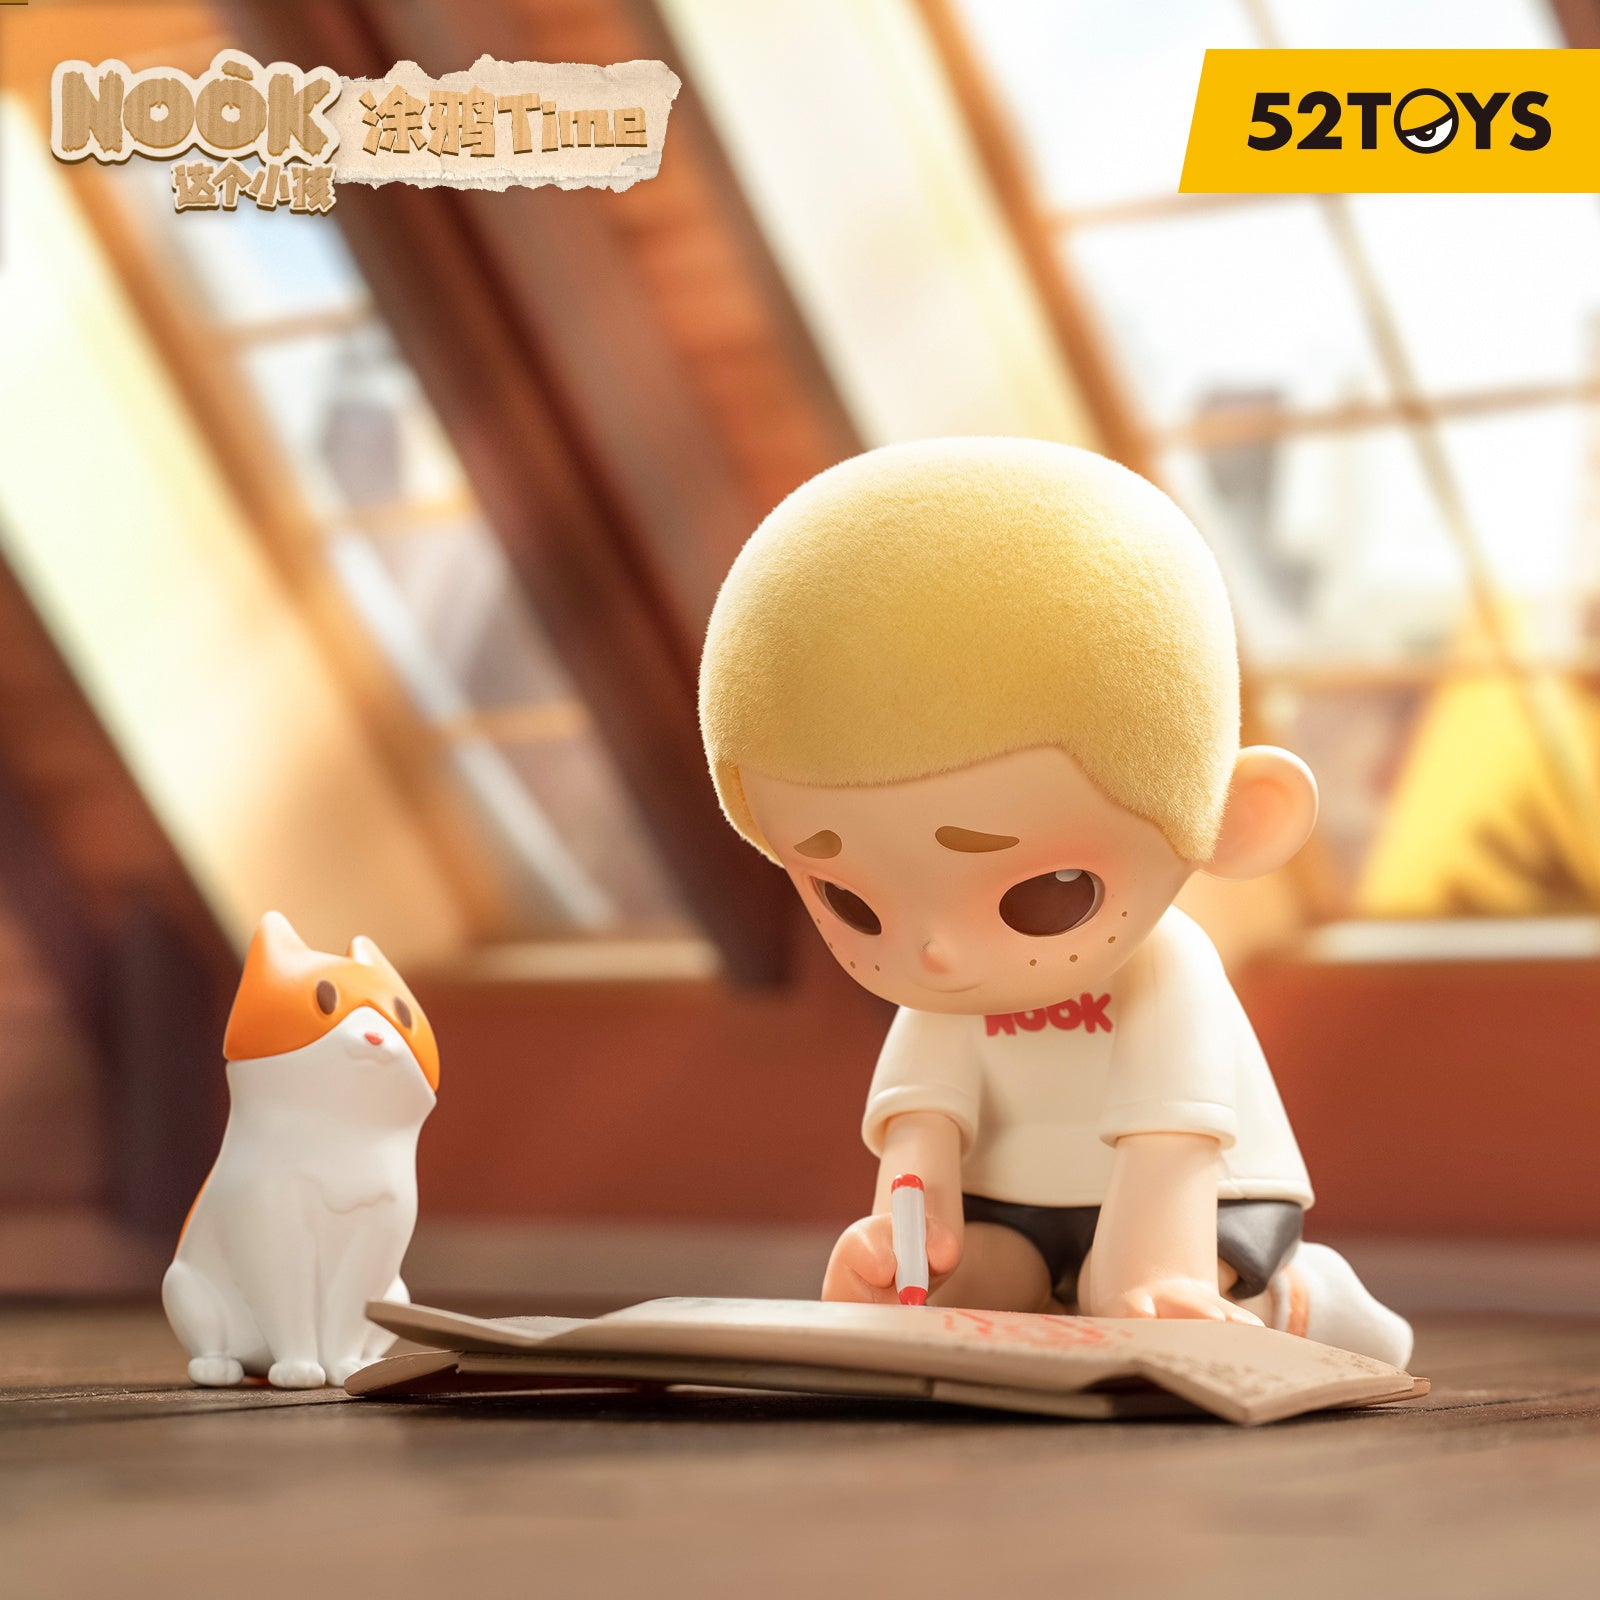 [52TOYS] NOOK - The Kid Series Blind Box